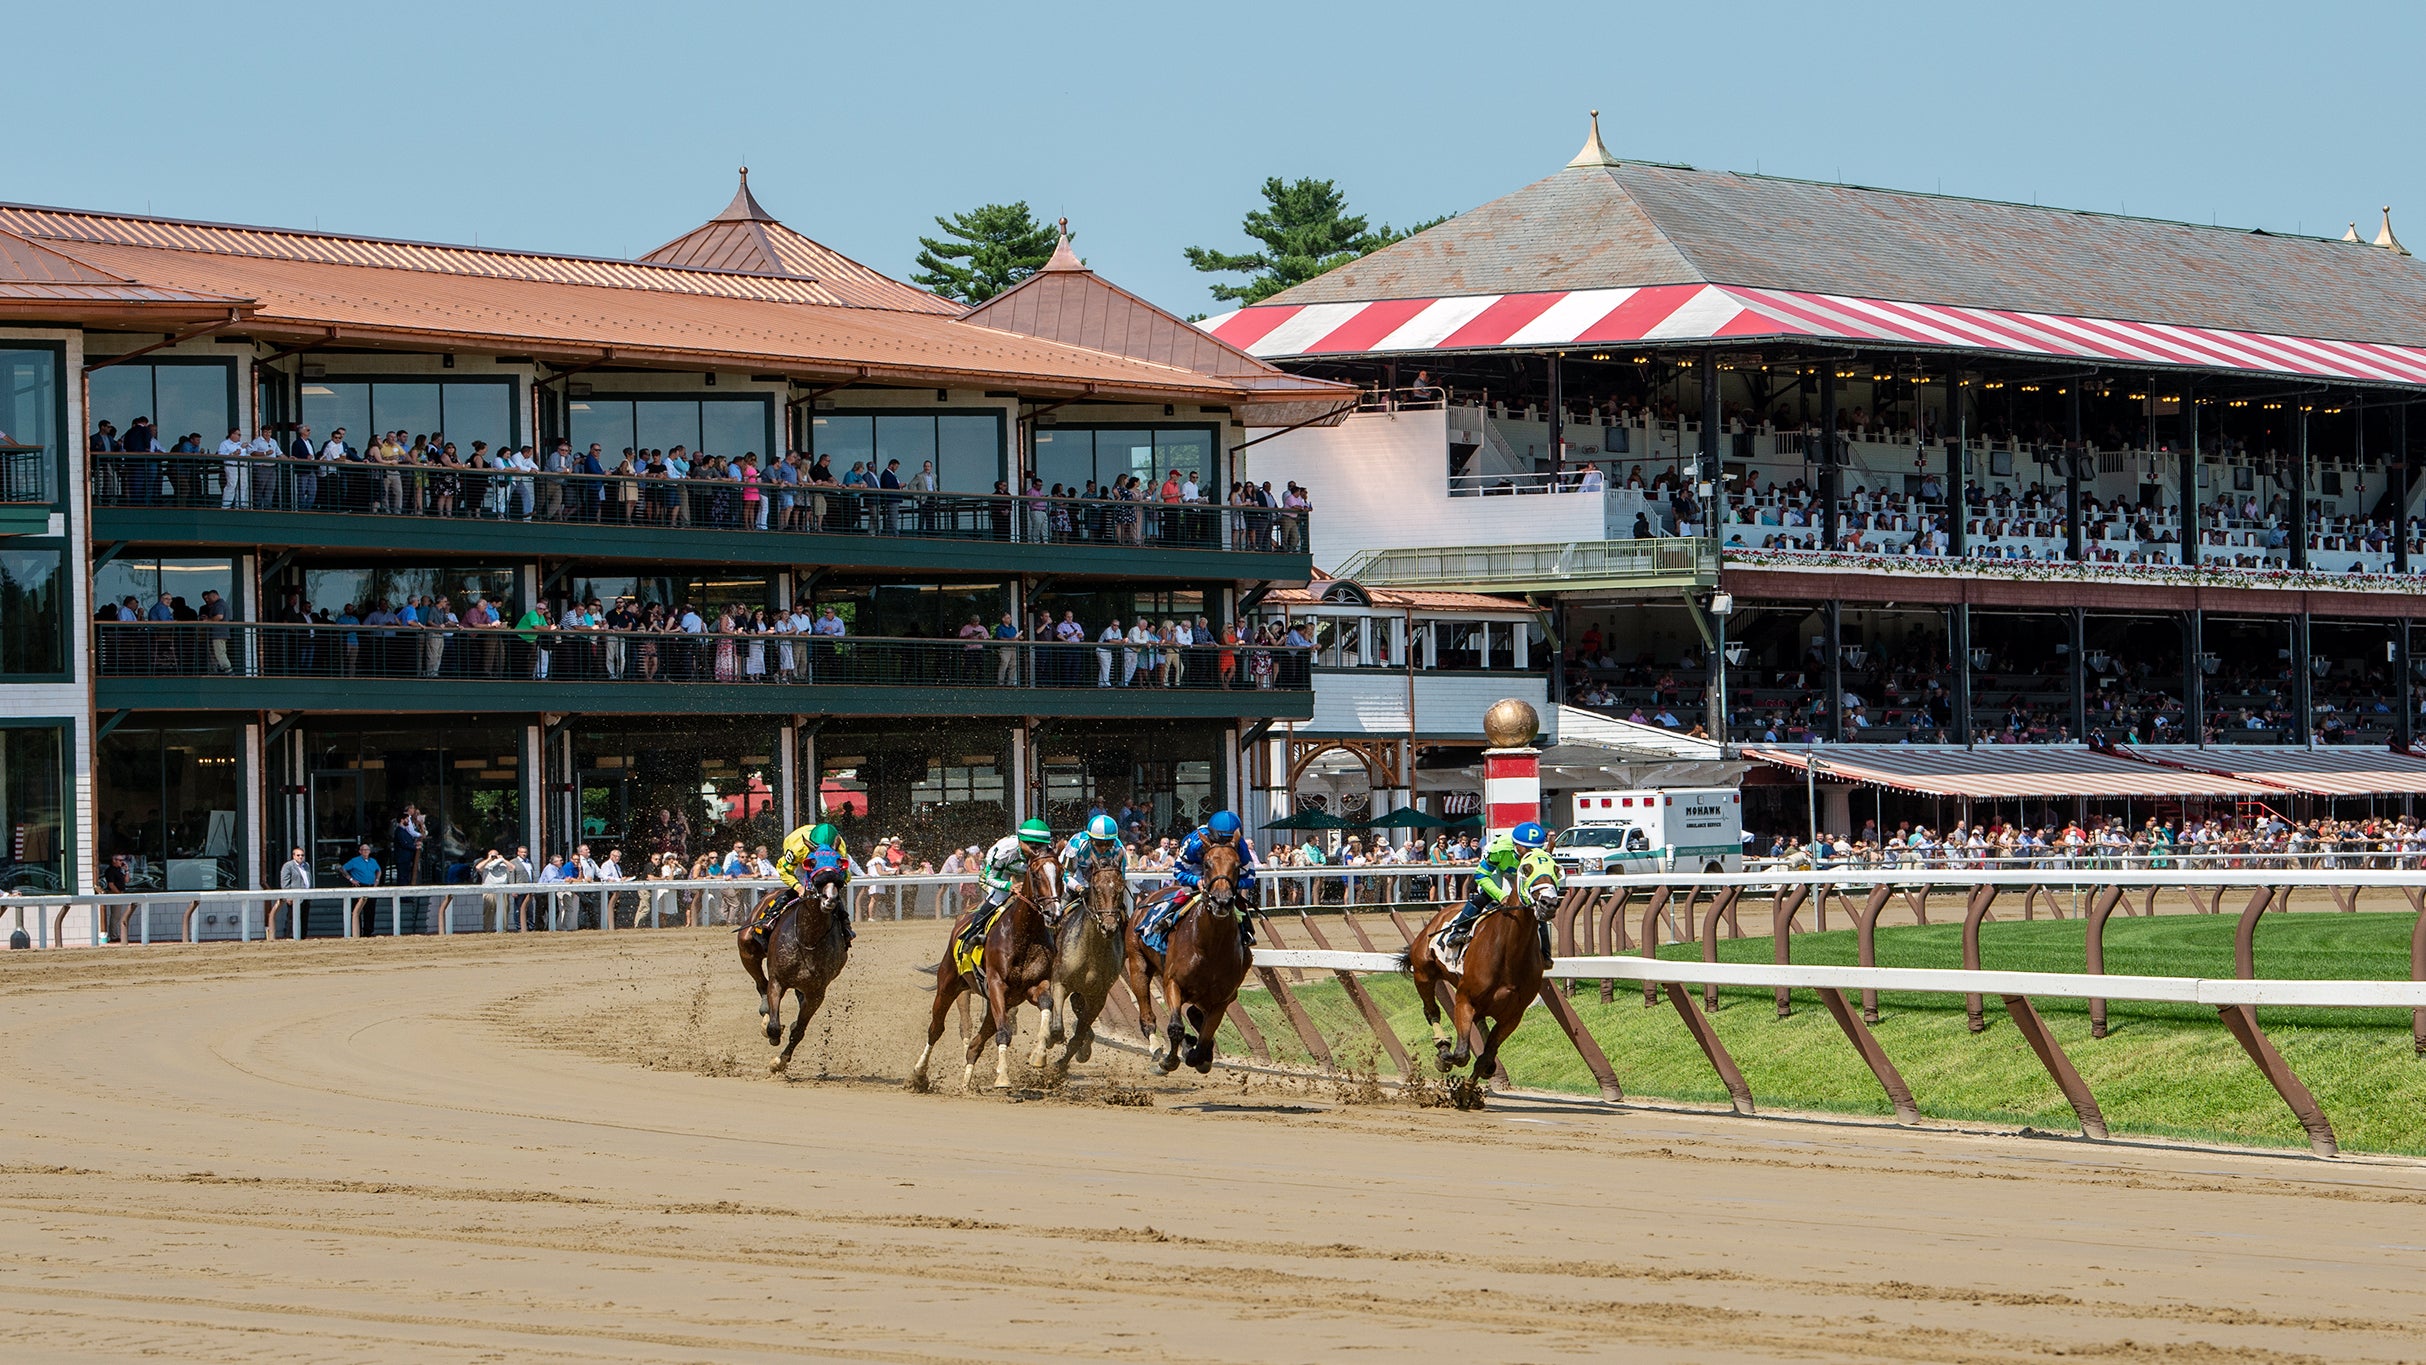 The Cutwater Stretch at Saratoga Race Course – Saratoga Springs, NY